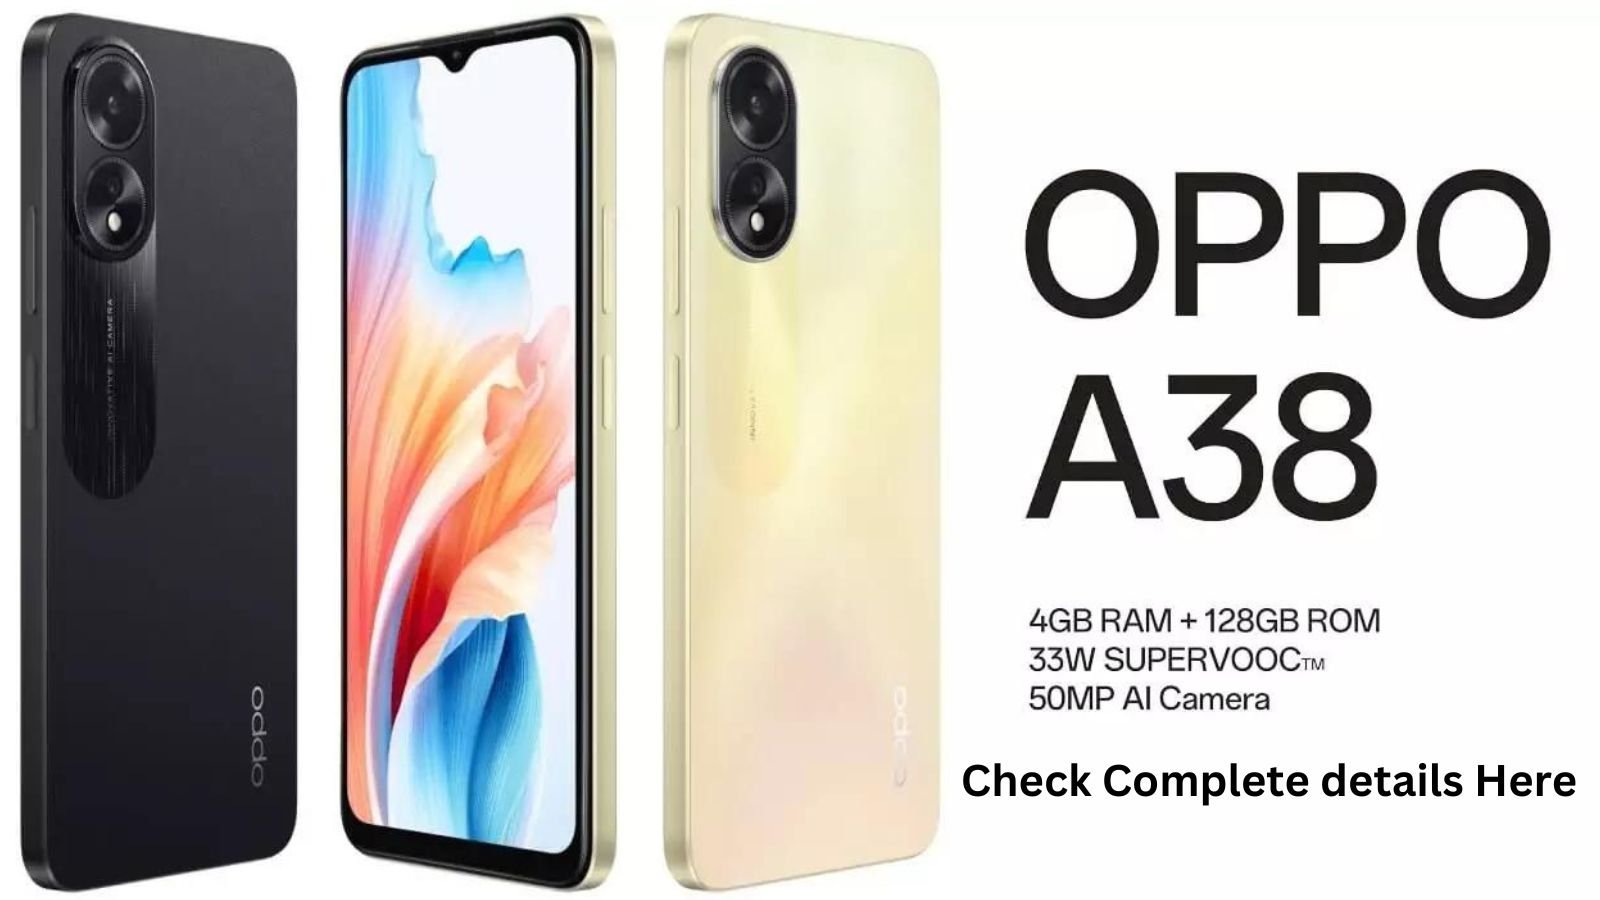 OPPO A38 EMI Price in India – Discount, Exchange Offers & Specifications